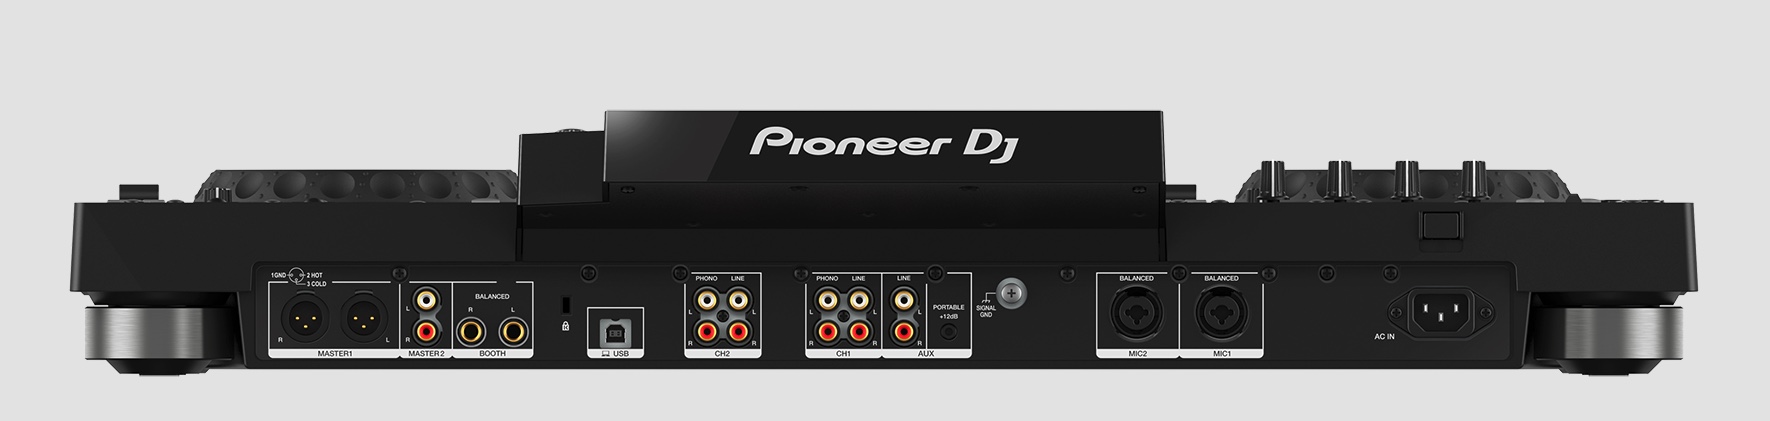 Pioneer DJ announces new standalone DJ unit with 10.1-inch touchscreen |  DJMag.com